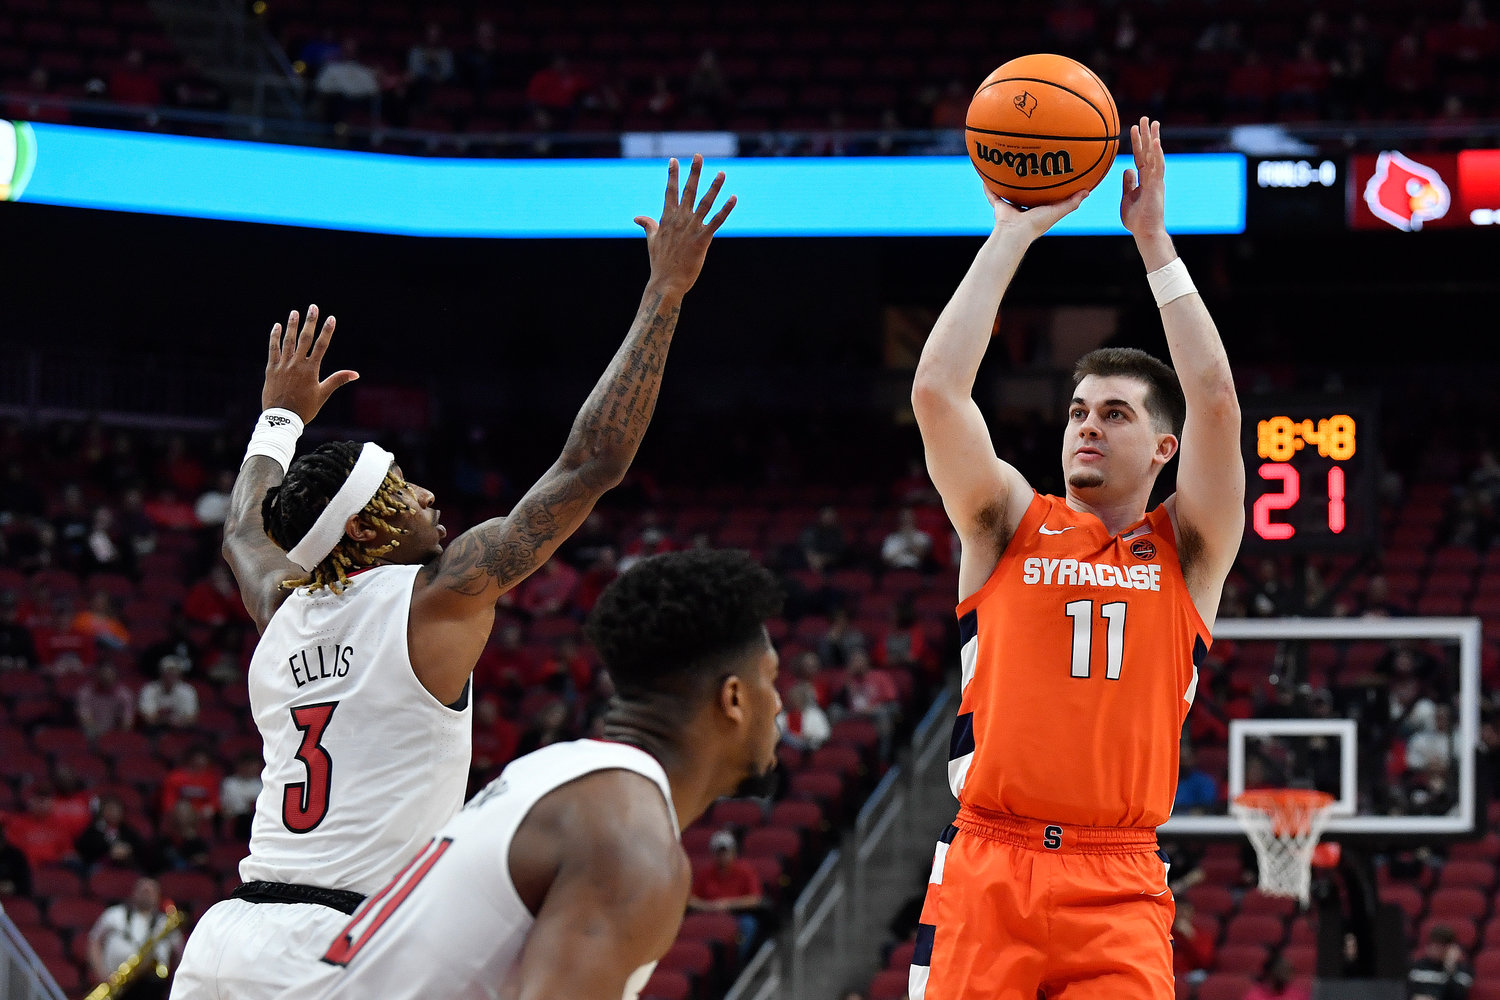 Syracuse guard Joe Girard III (11) shoots over Louisville guard El Ellis (3) during the first half of Tuesday night's game in Louisville, Ky. Girard III scored 28 points as the Orange survived a frantic final eight seconds to edge the Cardinals 70-69.